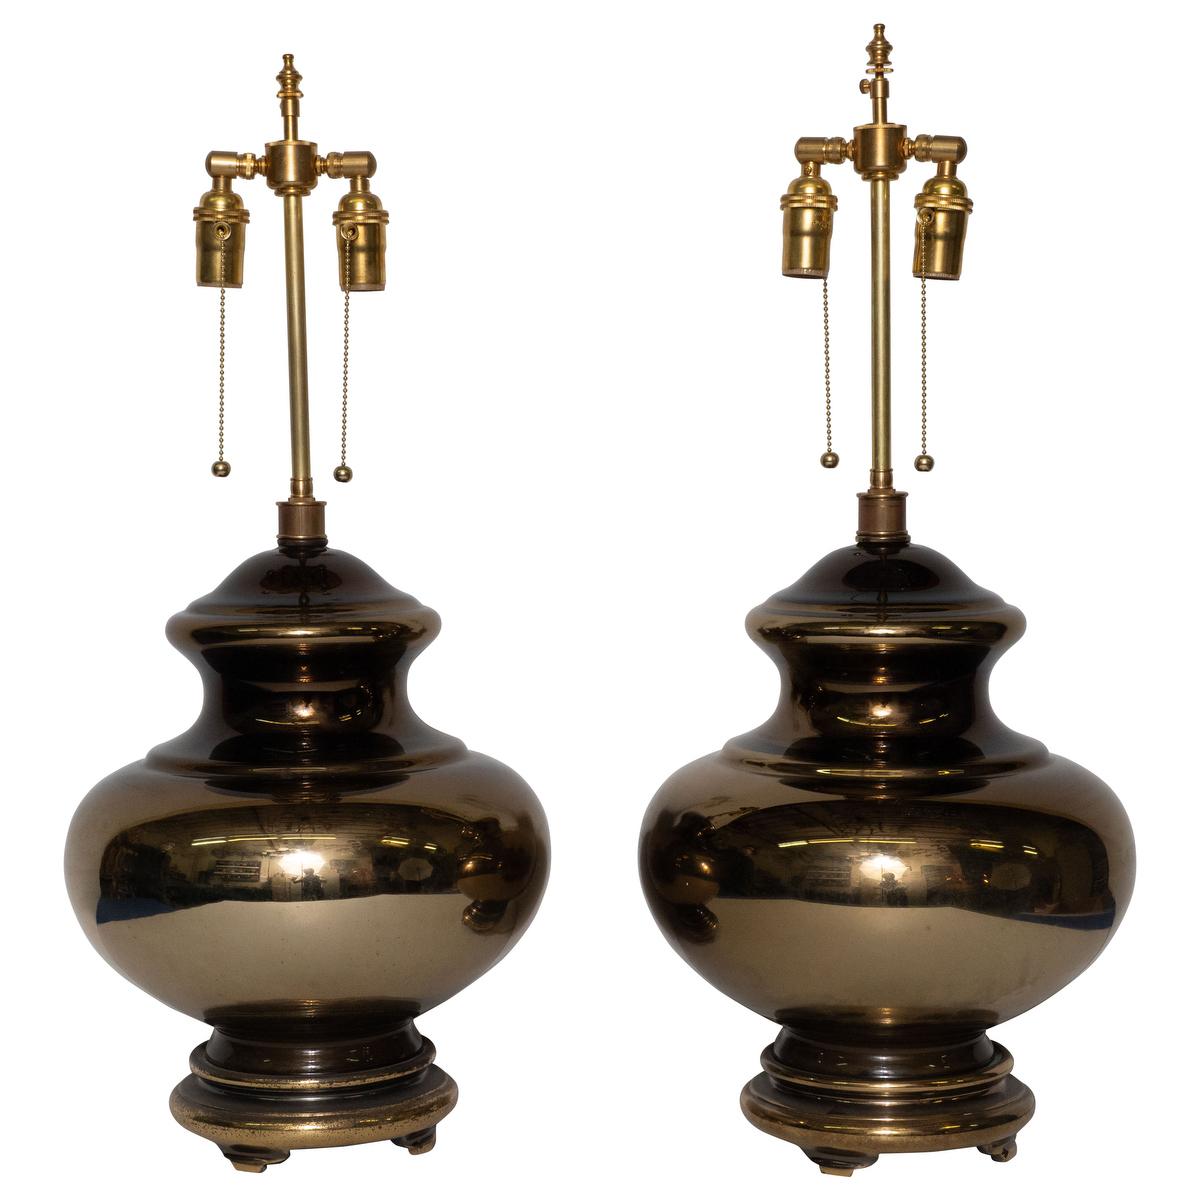 Pair of glass urn-shaped table lamps with golden mercury finish and brass hardware.